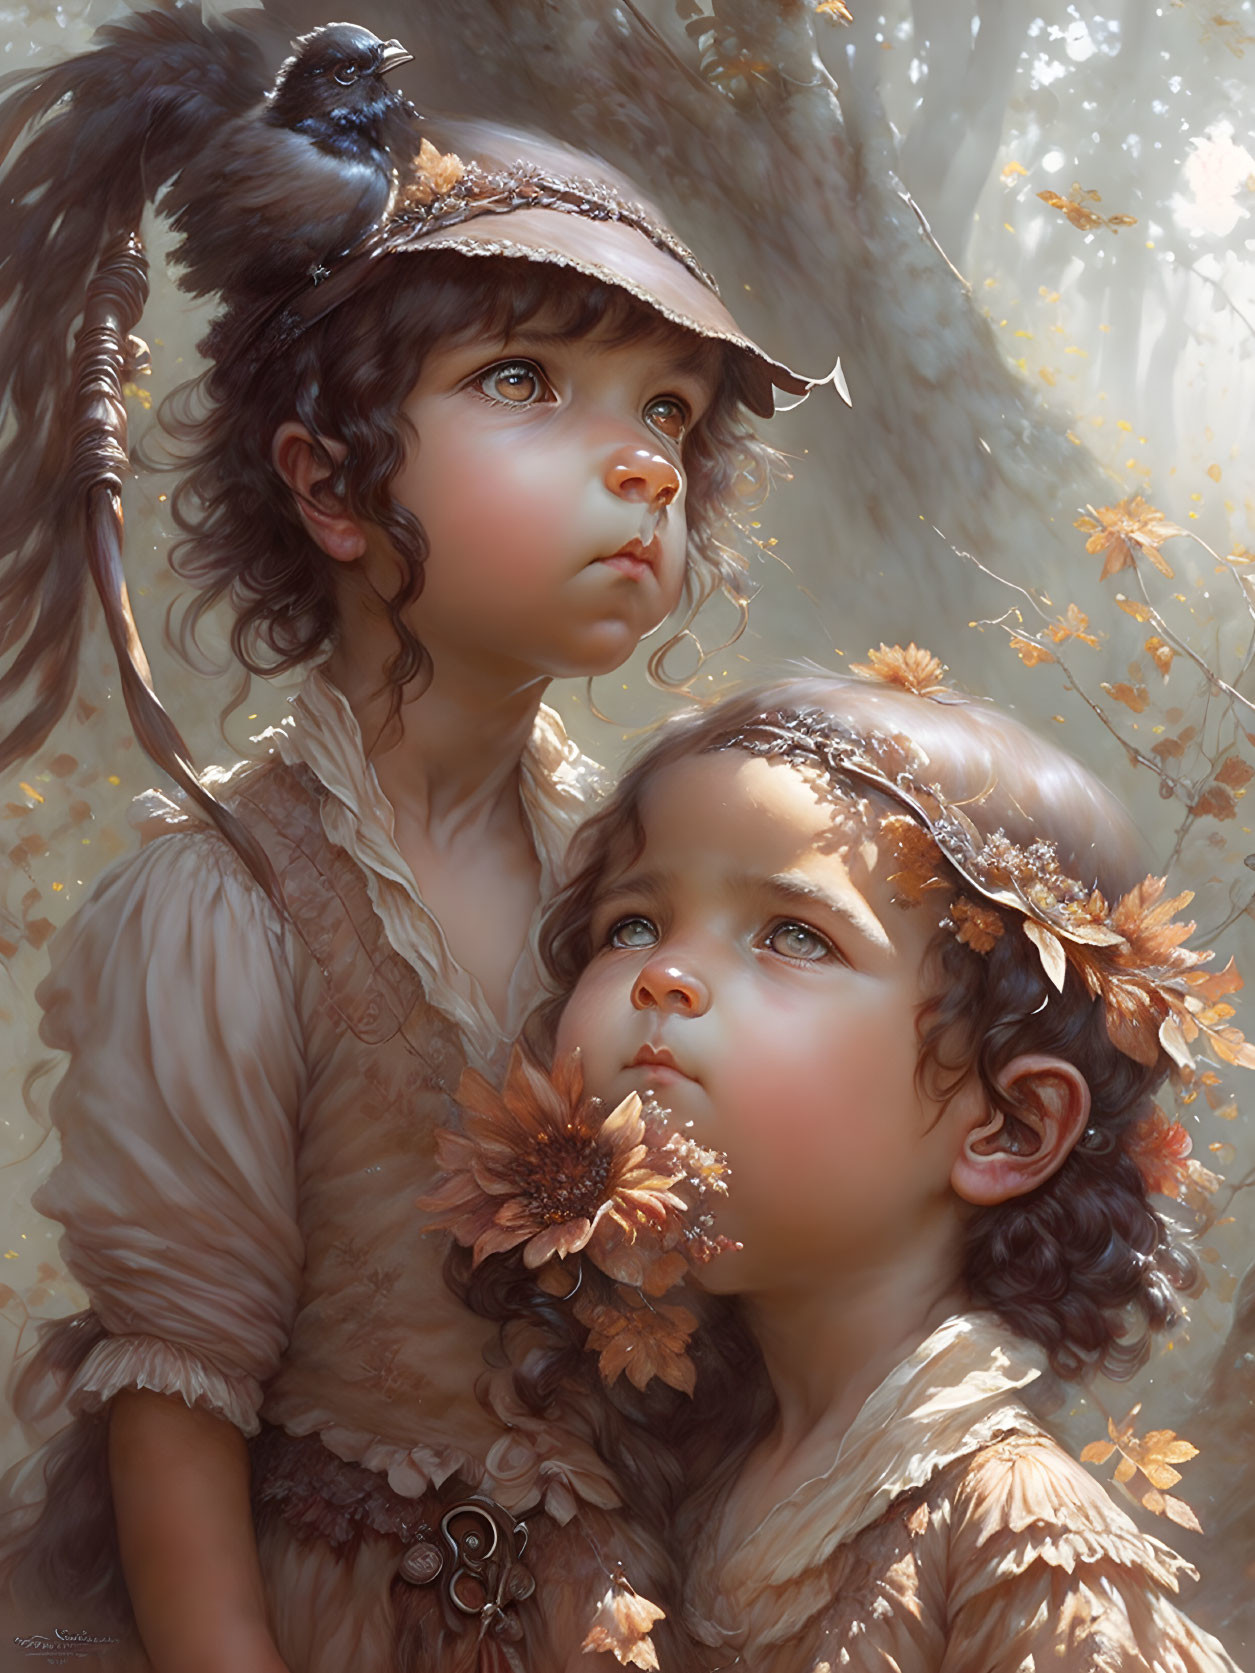 Children with floral adornments under sunlight with bird perched on cap